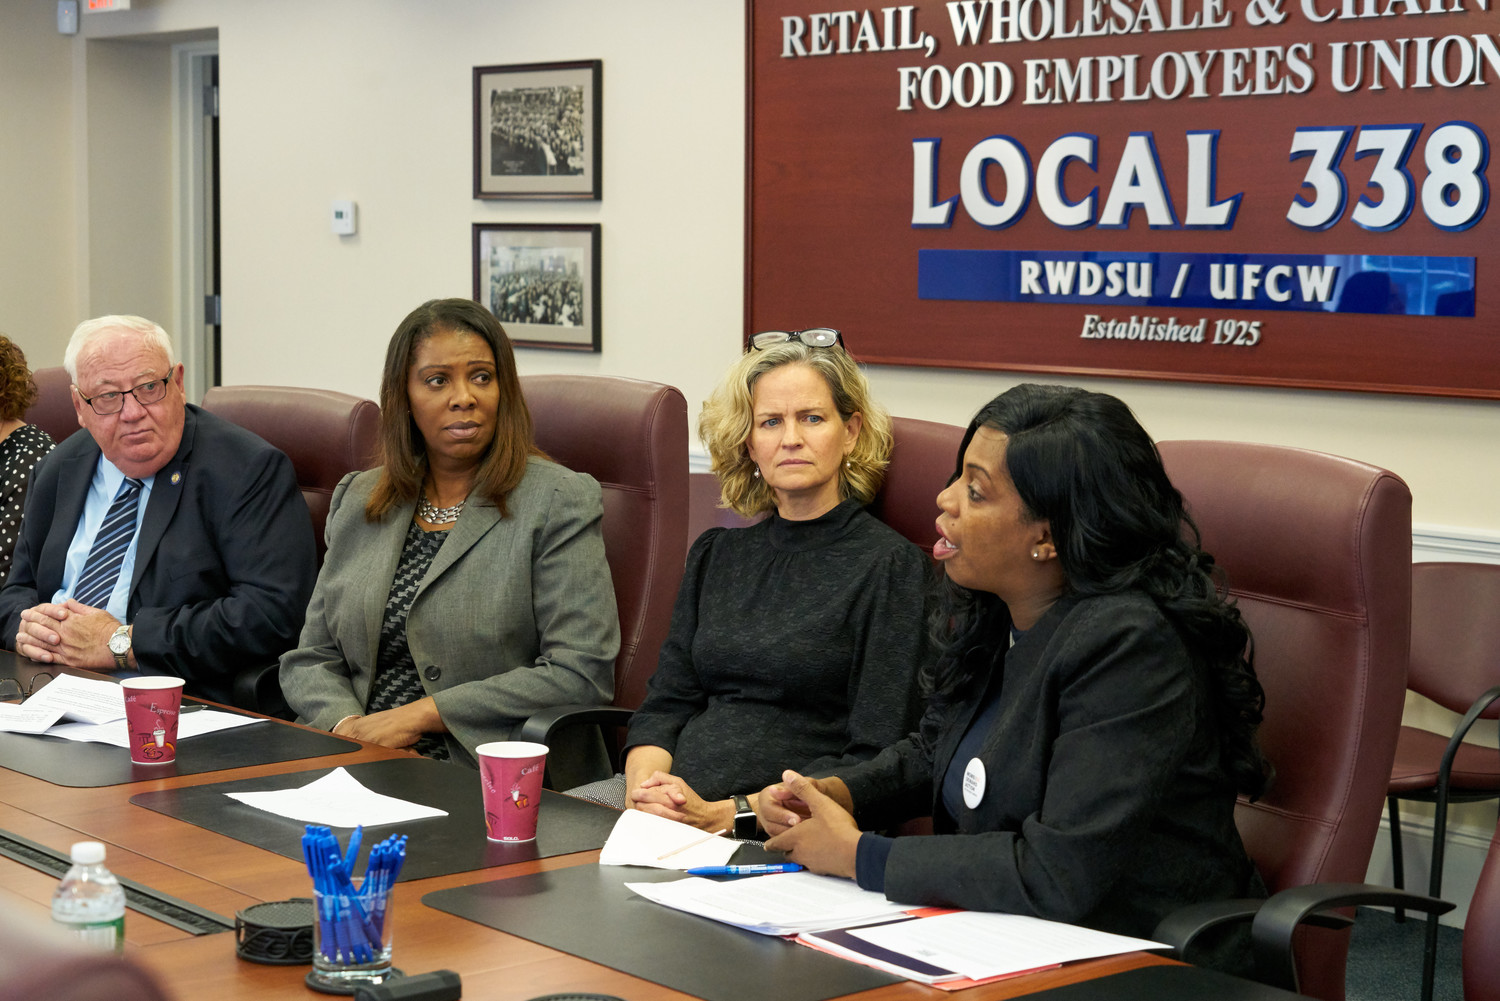 Shenee Johnson, far right, from the Suffolk County chapter of Moms Demand Action, addressed a Gun Violence Roundtable held at the local 338 chapter in Mineola on the morning of the fundraiser. Johnson’s son was shot and killed in Queens in 2010. From left were State Sen. John Brooks, New York City Public Advocate and state attorney general candidate Letitia James, Nassau County Executive Laura Curran and Johnson.